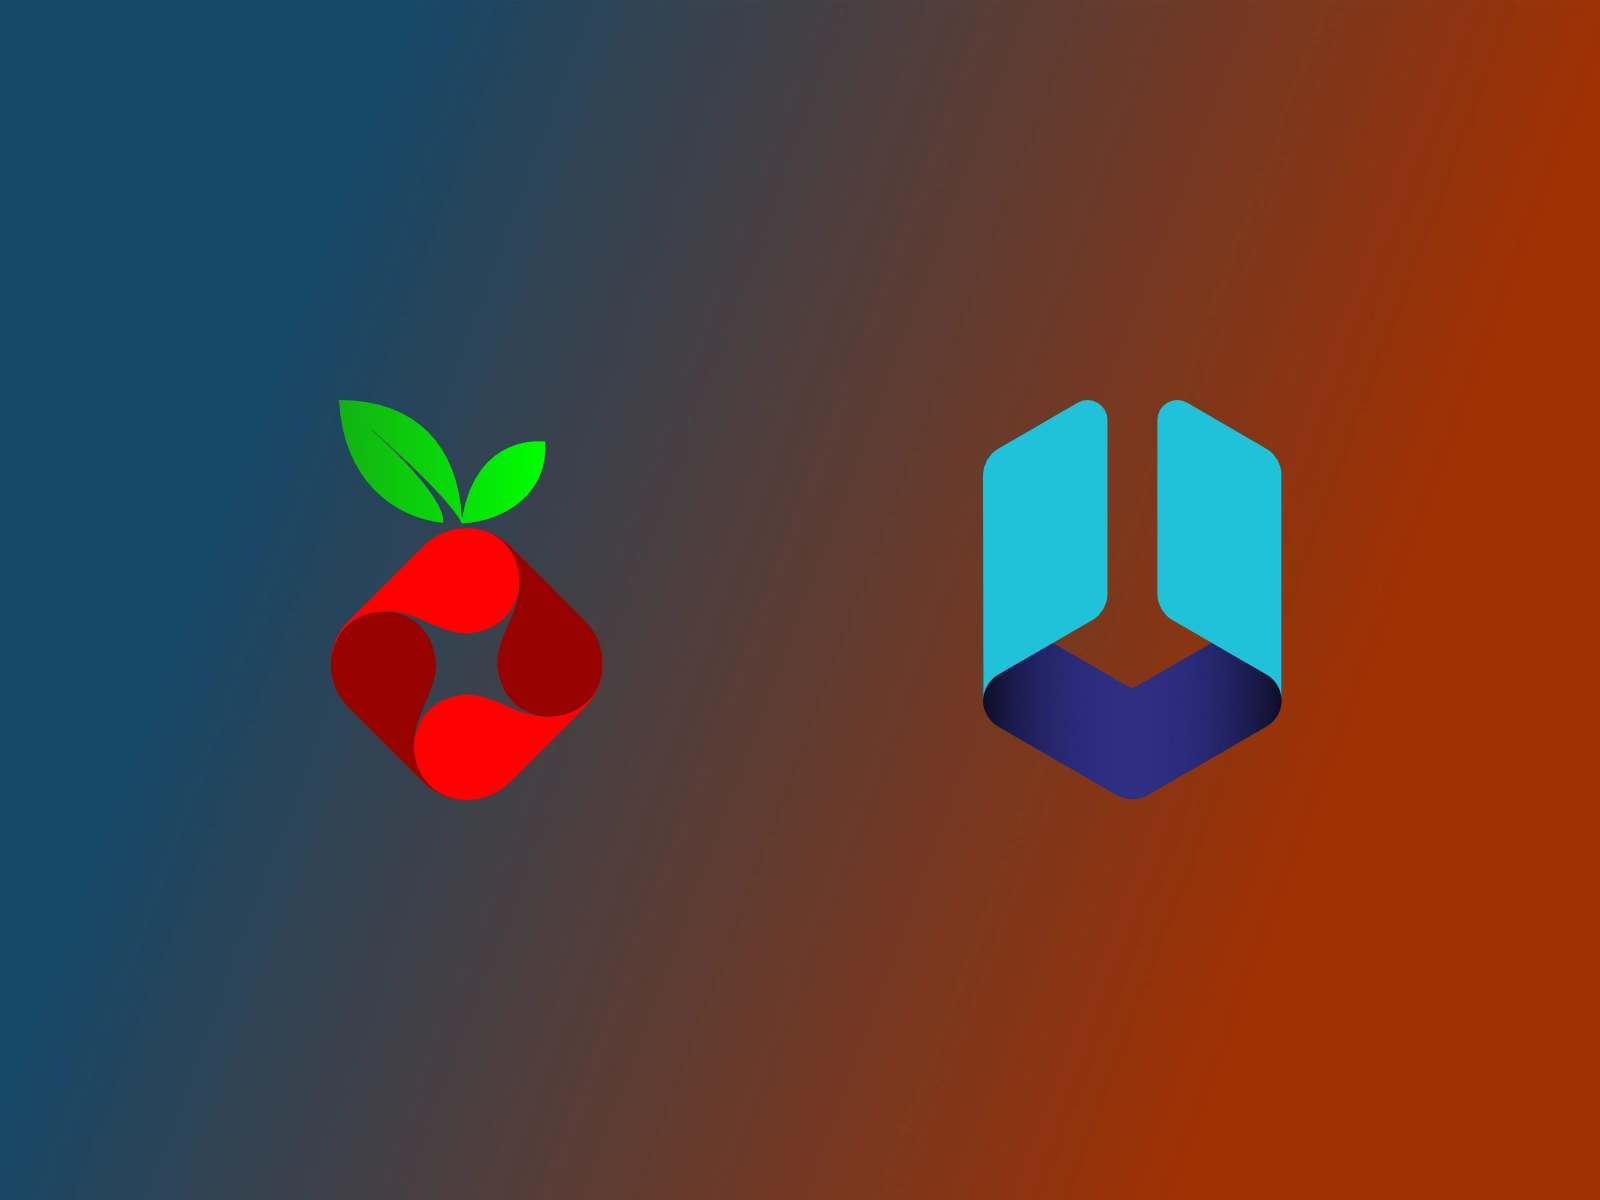 Pi-Hole and Unbound logos over a gradient